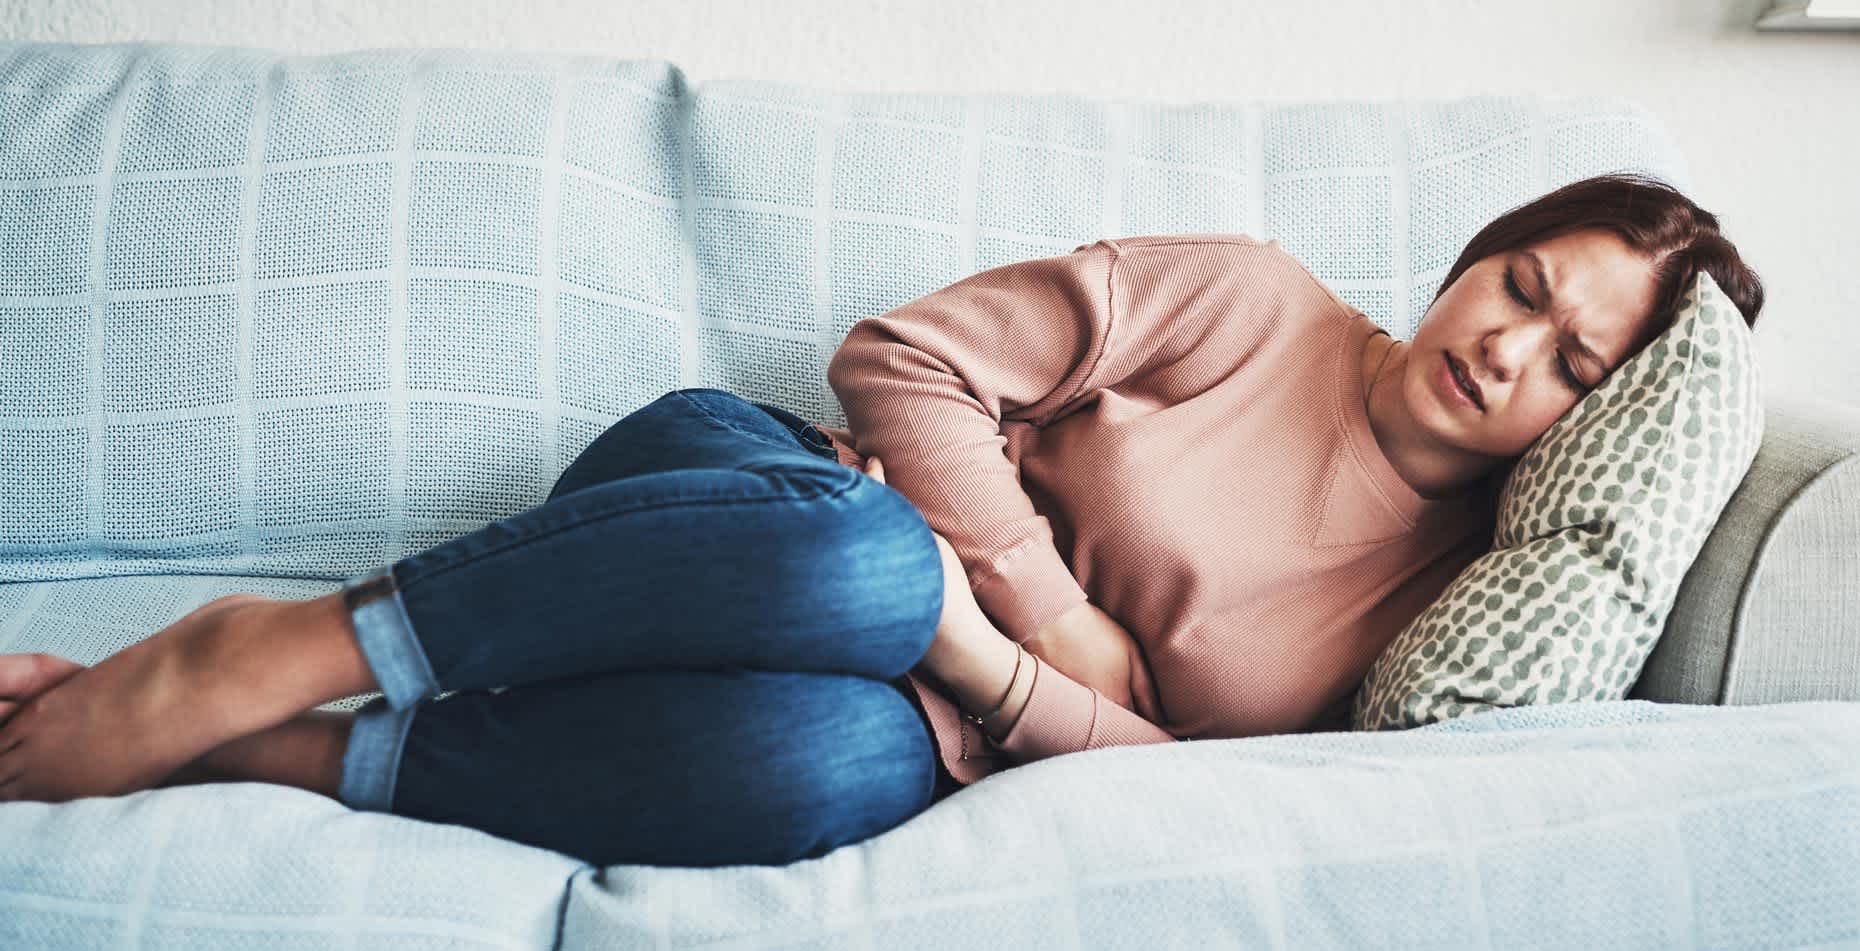 Woman lying on the couch experiencing complications from untreated trichomoniasis